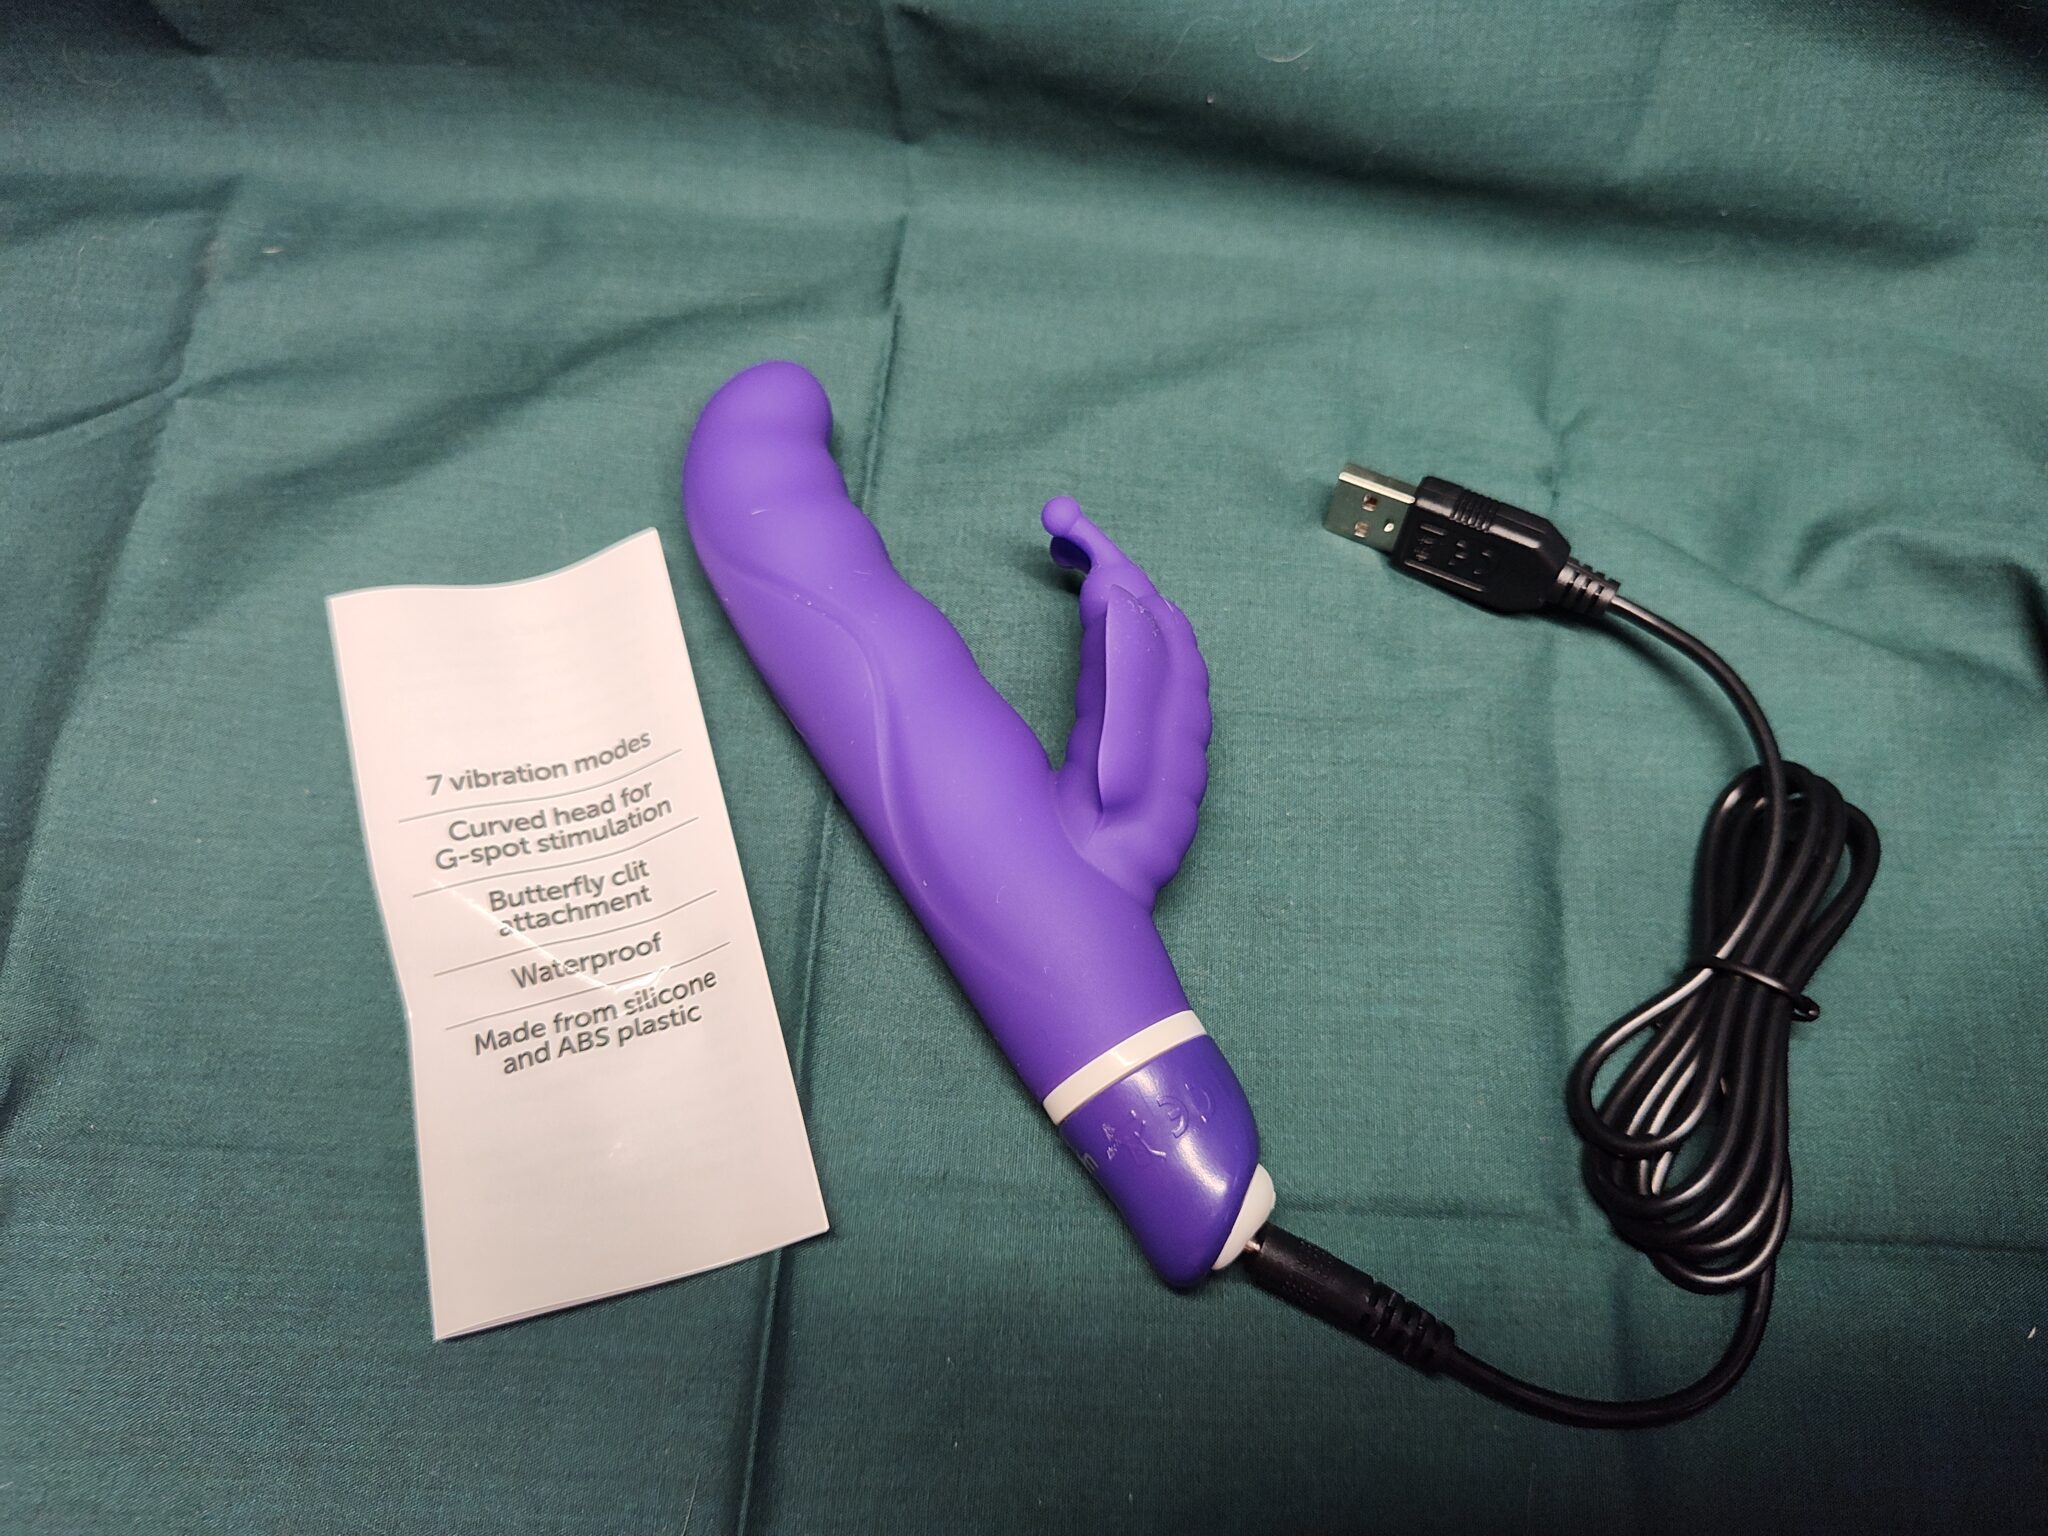 EdenFantasys Butterfly G Rabbit Vibrator The EdenFantasys Butterfly G Rabbit Vibrator: My Take on Ease of Use